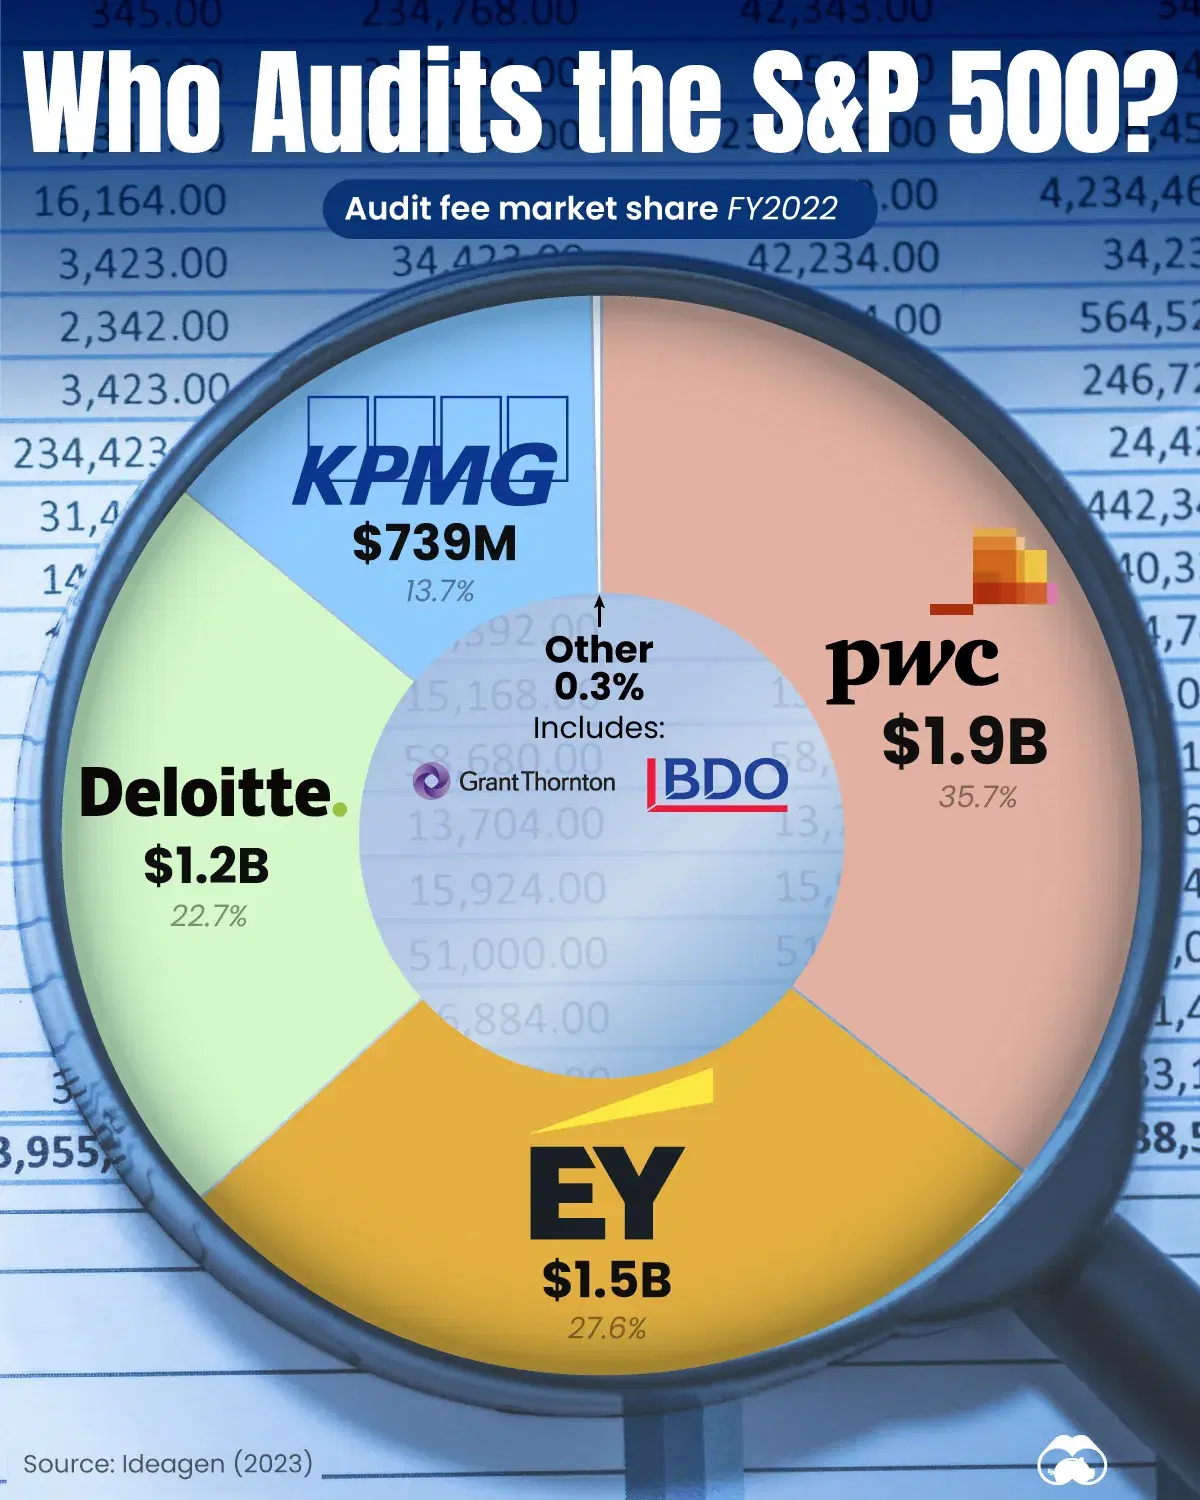 The Big Four Has a 99.7% Market Share on S&P 500 Audits 🔍